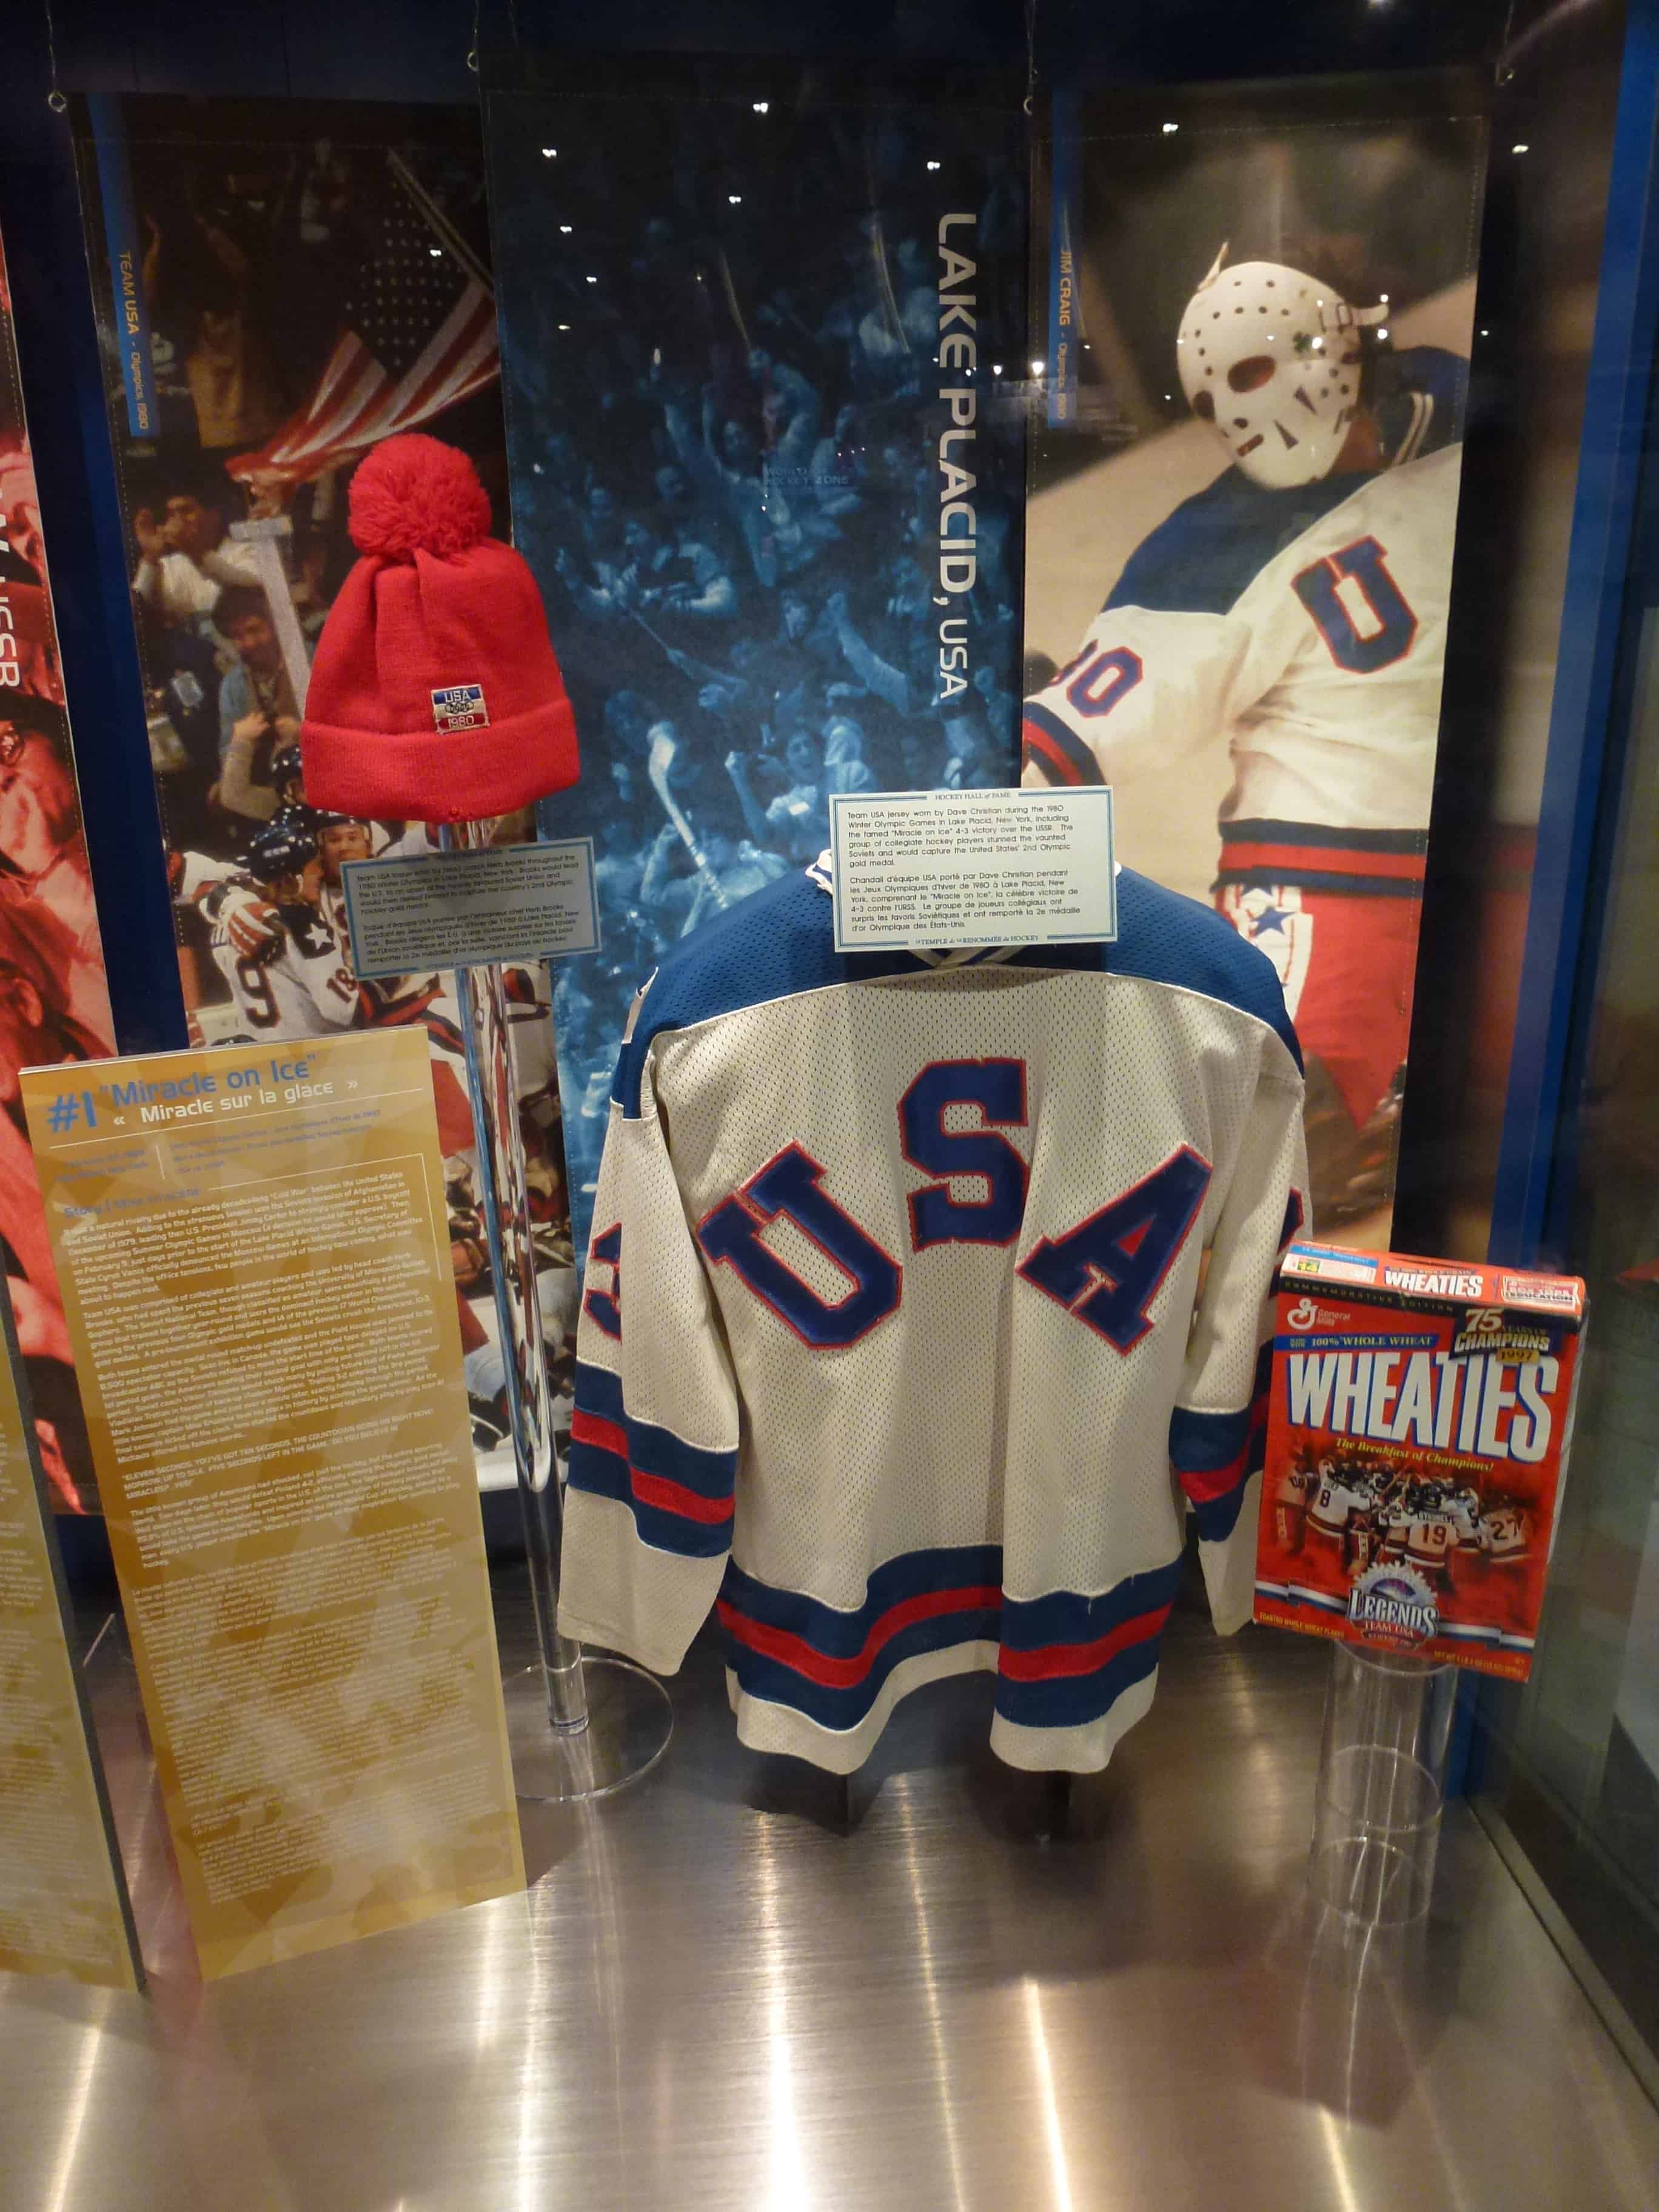 1980 Miracle on Ice at the Hockey Hall of Fame in Toronto, Ontario, Canada